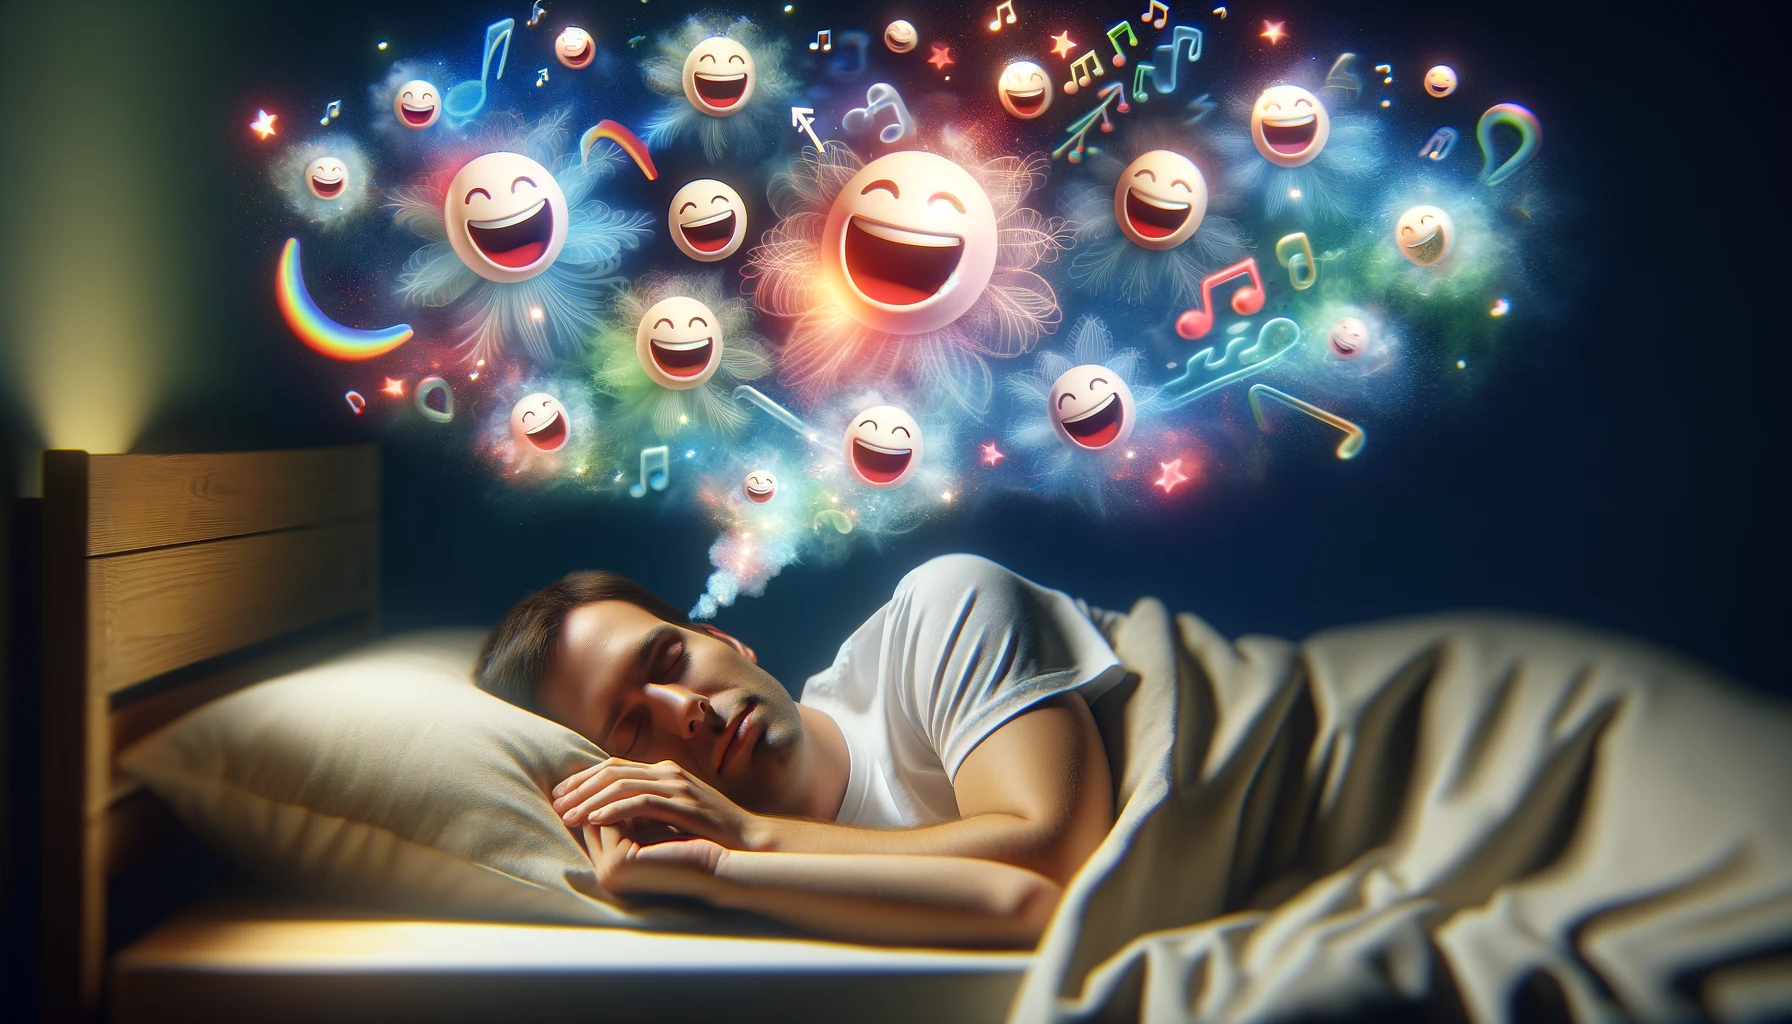 man dreaming of laughter featured image